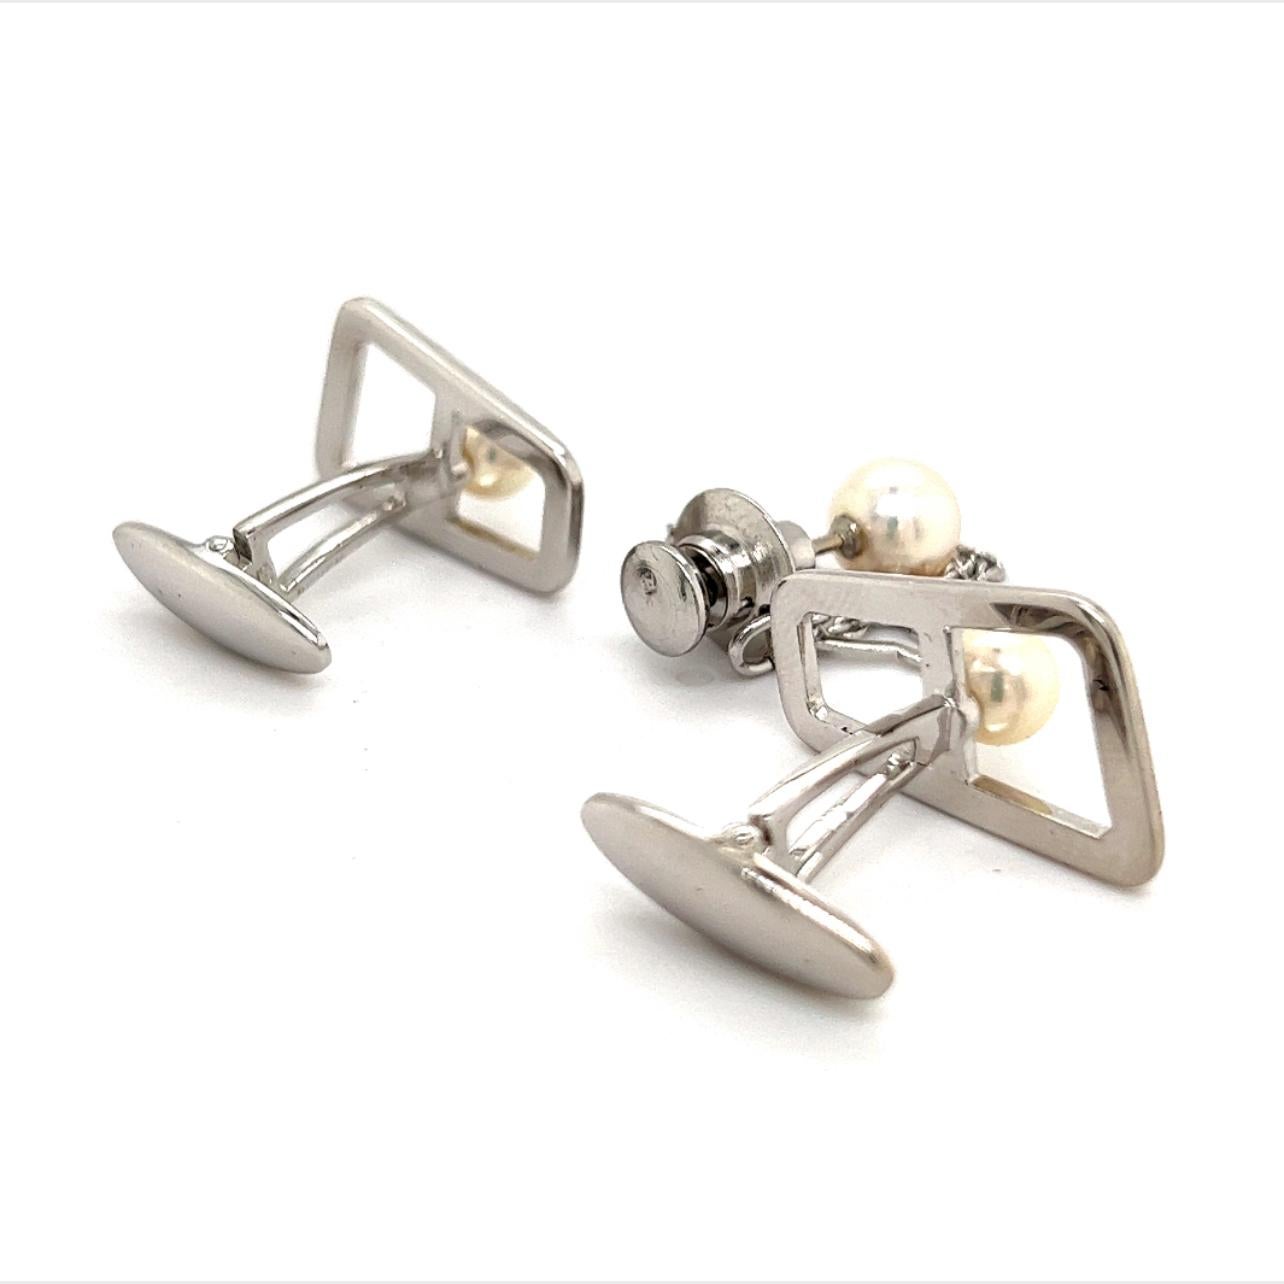 Mikimoto Estate Akoya Pearl Cufflinks and Tie Pin Sterling Silver For Sale 3